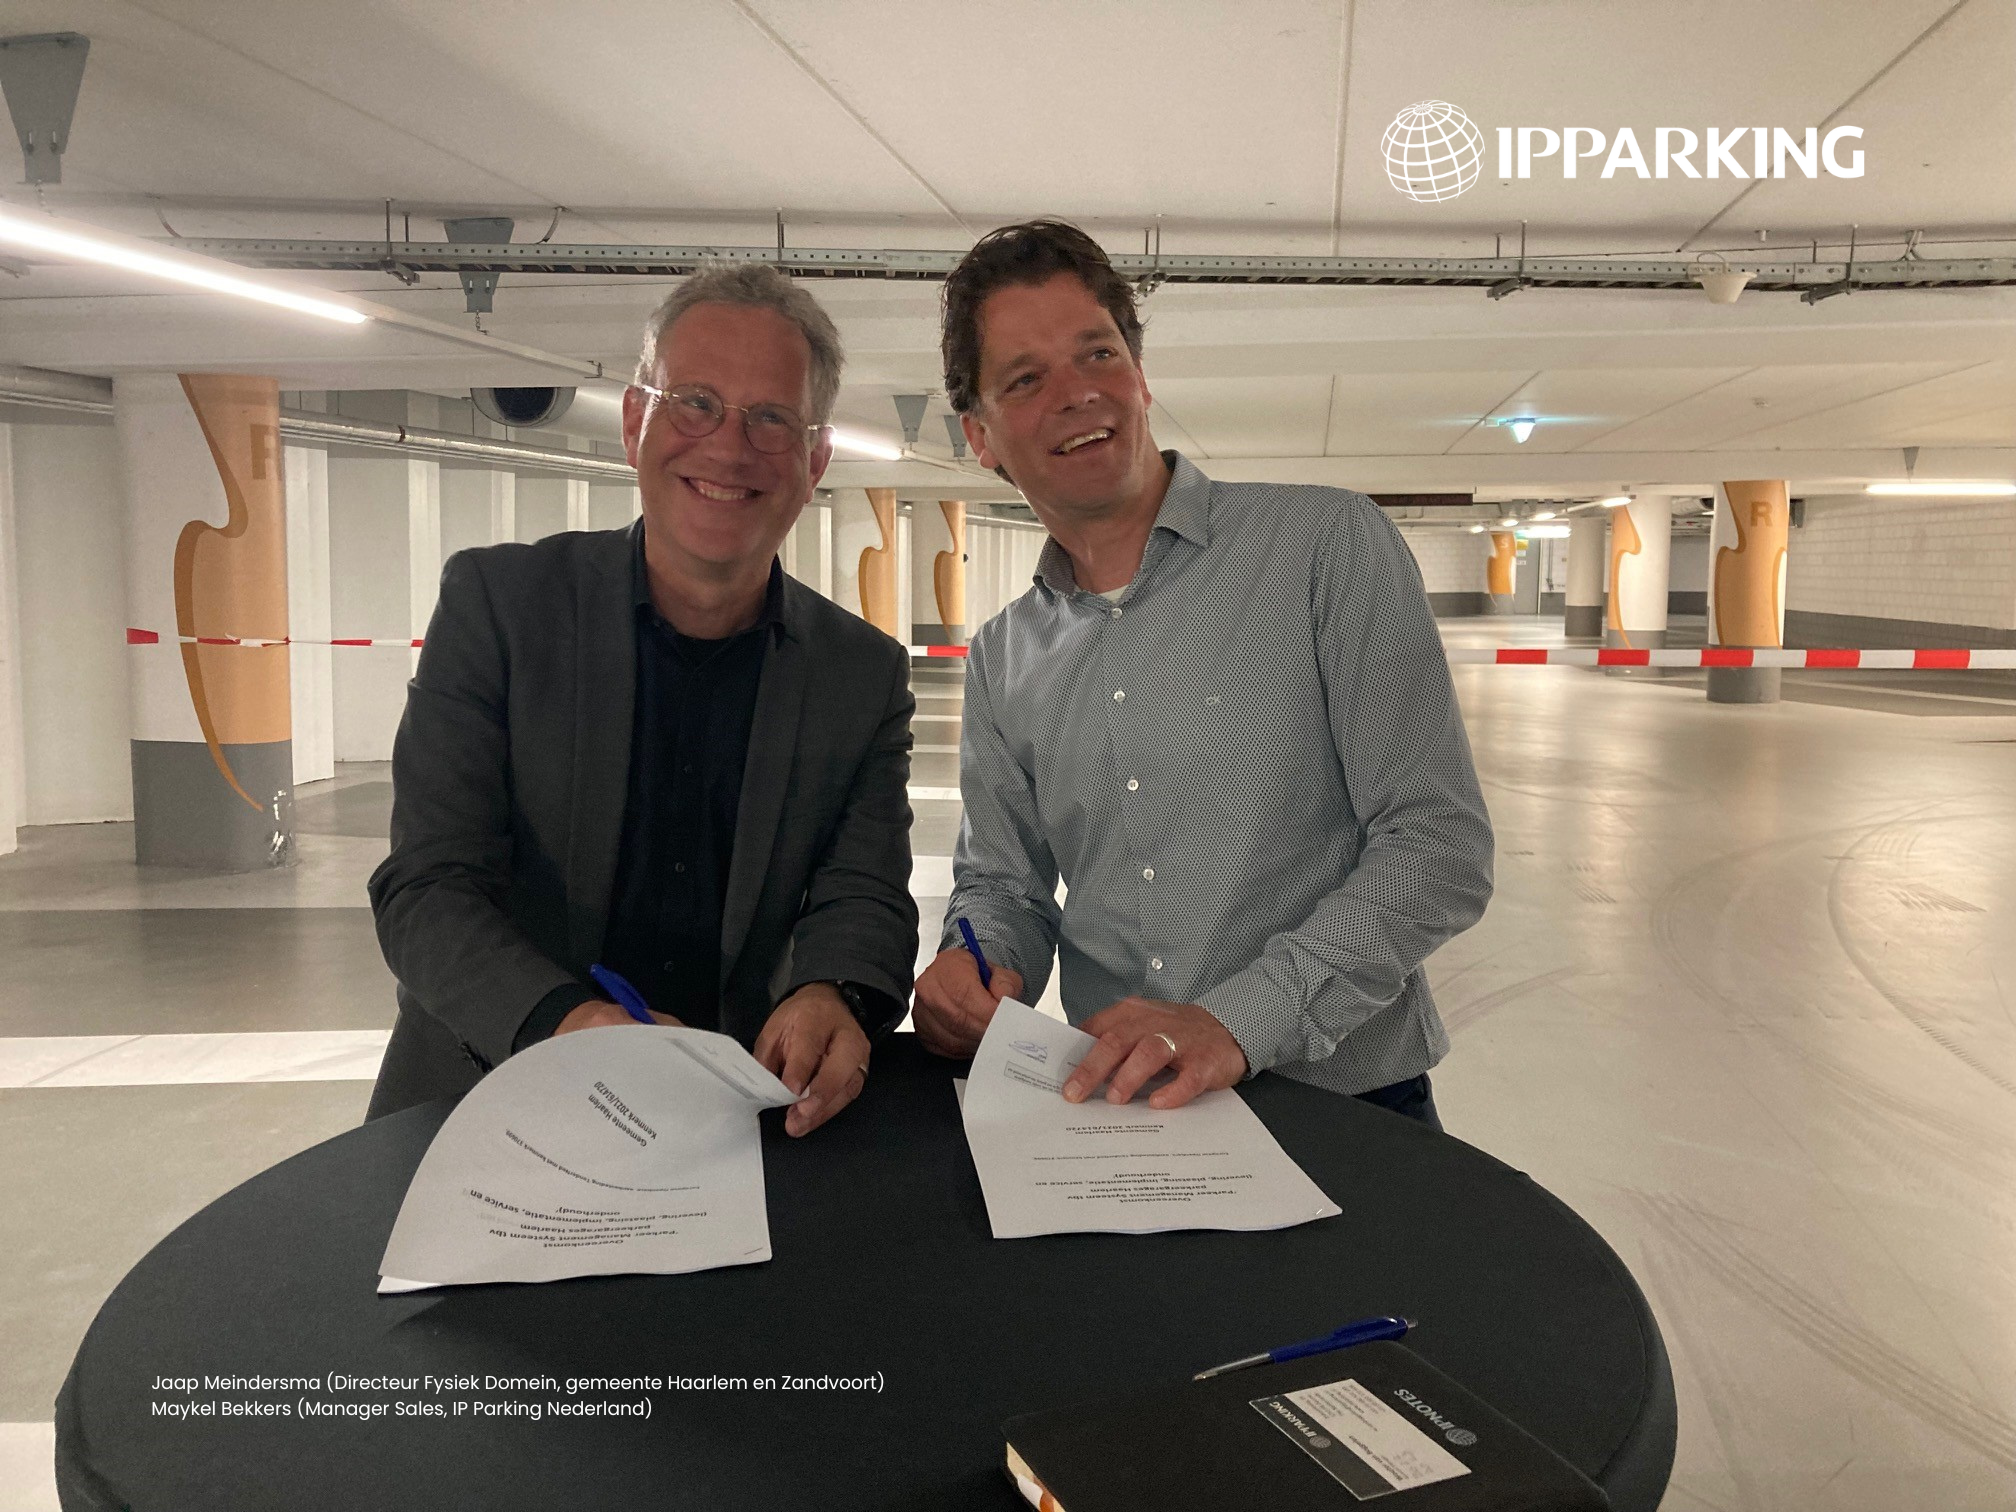 The Municipality of Haarlem (NL) has selected IP Parking to replace the entire parking management system of the 6 municipal parking garages: Houtplein, Raaks, Kamp, Cronjé, Appelaar and Dreef.